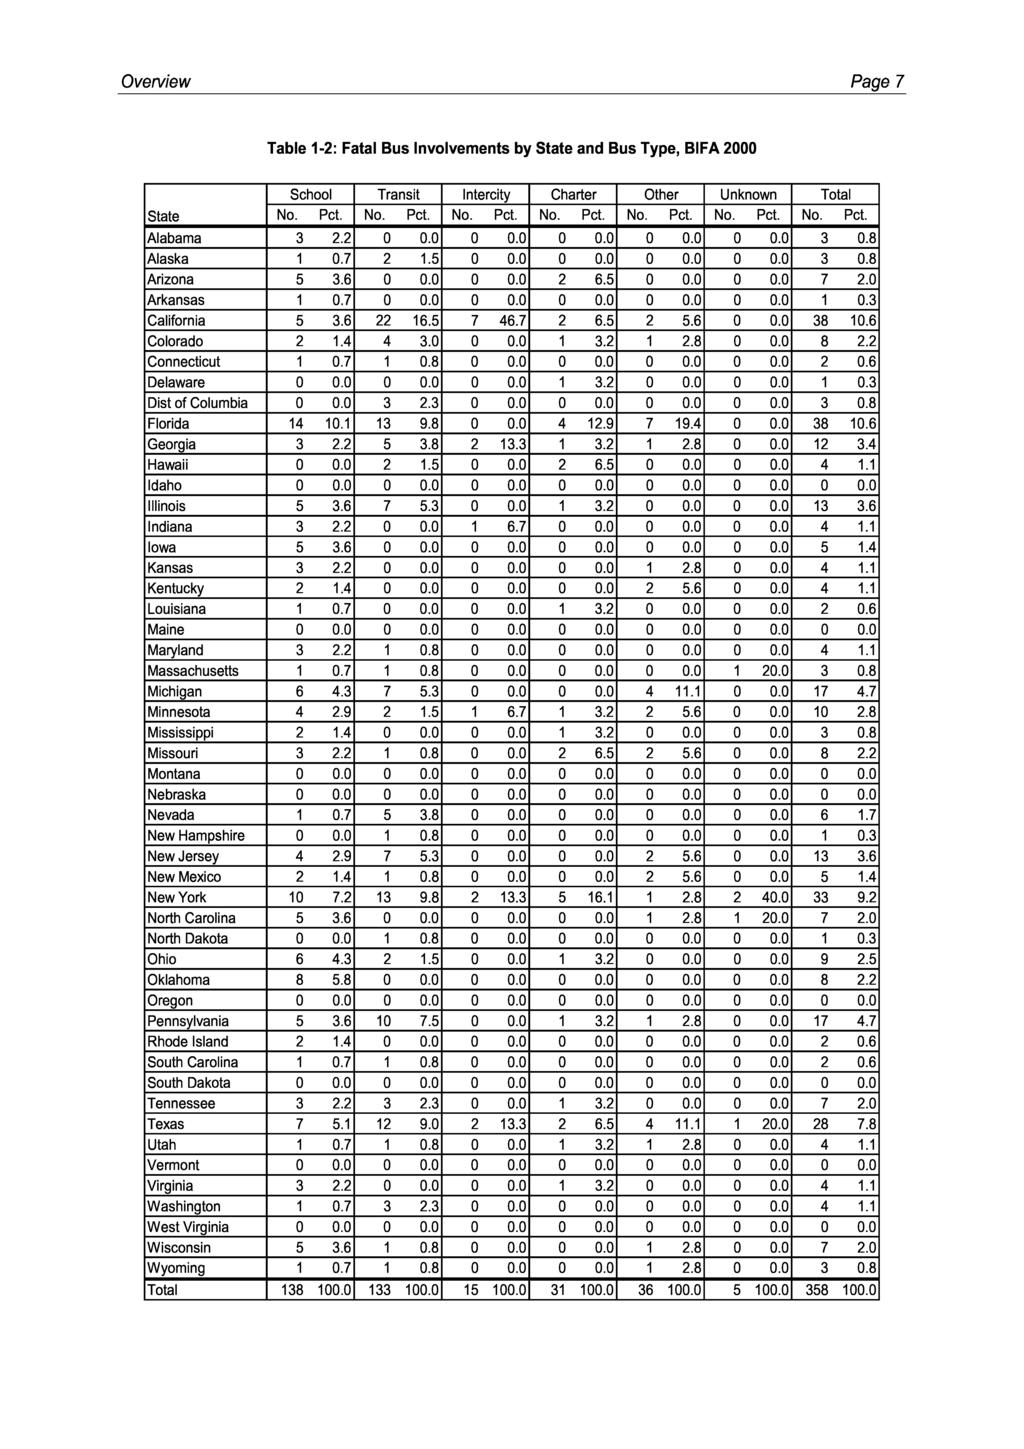 Table 1-2: Fatal Bus Involvements by State and Bus Type, Wisconsin Wyoming Total 5 3.6 1 0.